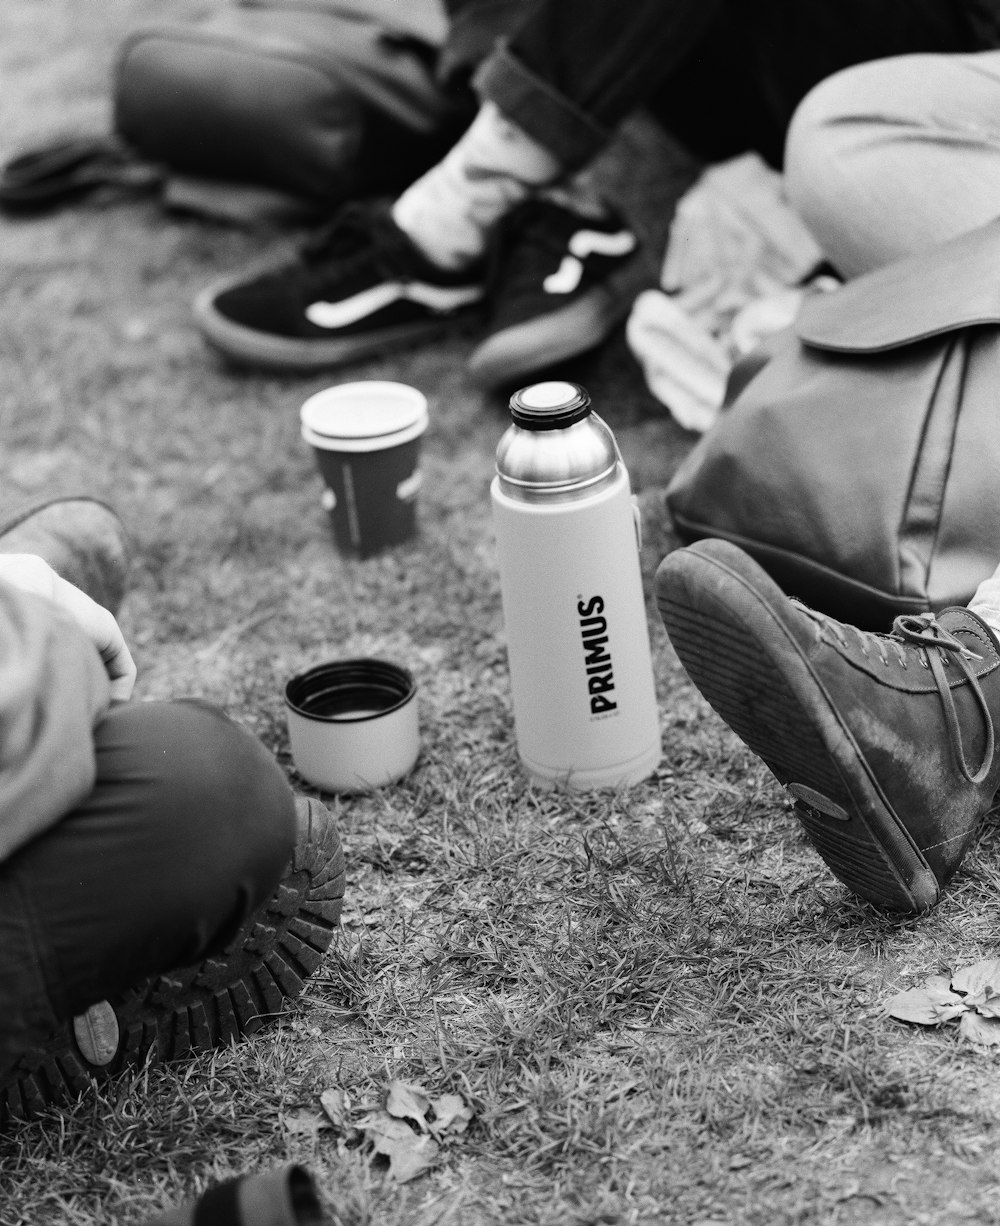 a group of people sitting on the grass with cups and a can